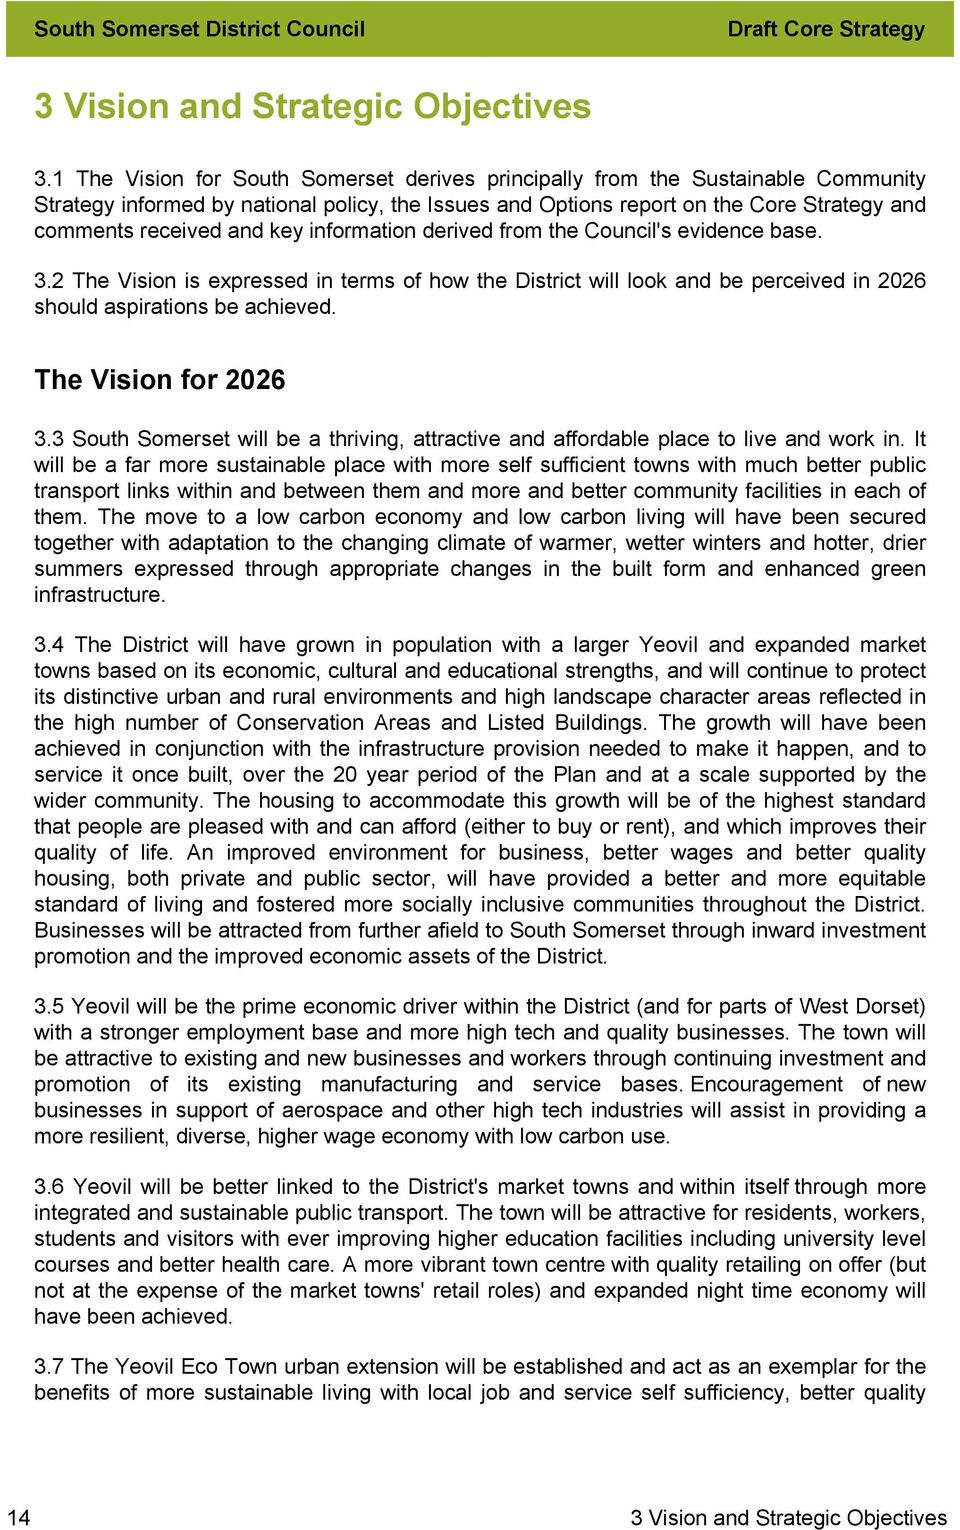 key information derived from the Council's evidence base. 3.2 The Vision is expressed in terms of how the District will look and be perceived in 2026 should aspirations be achieved.